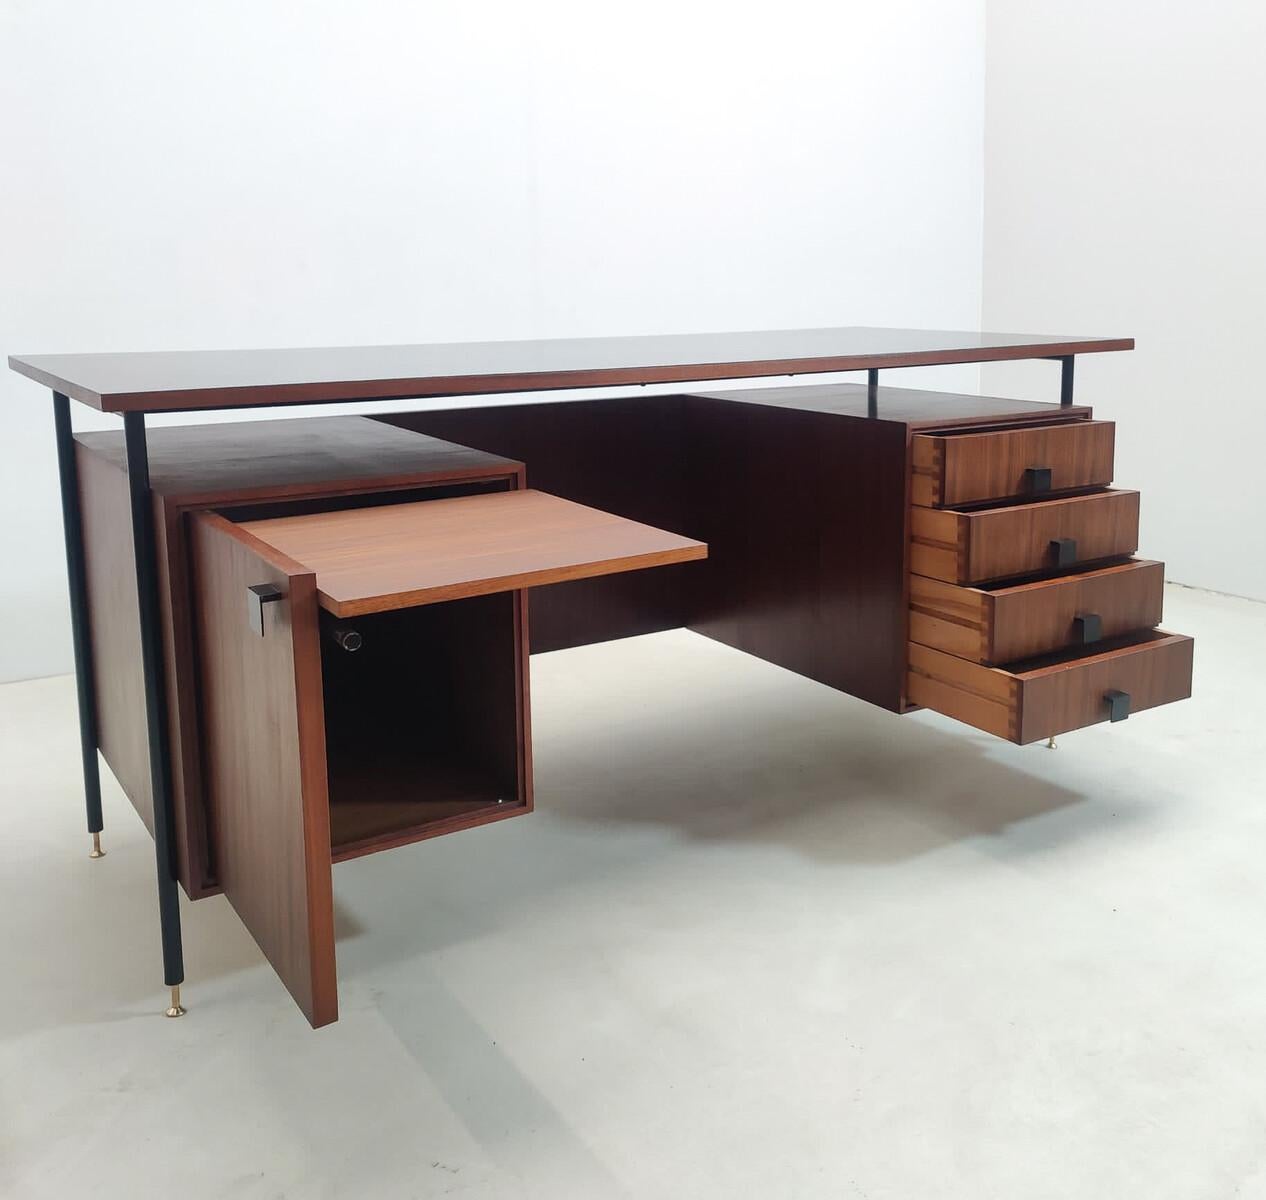 Mid-Century Modern Italian Desk with Drawers, Wood, 1960s For Sale 2